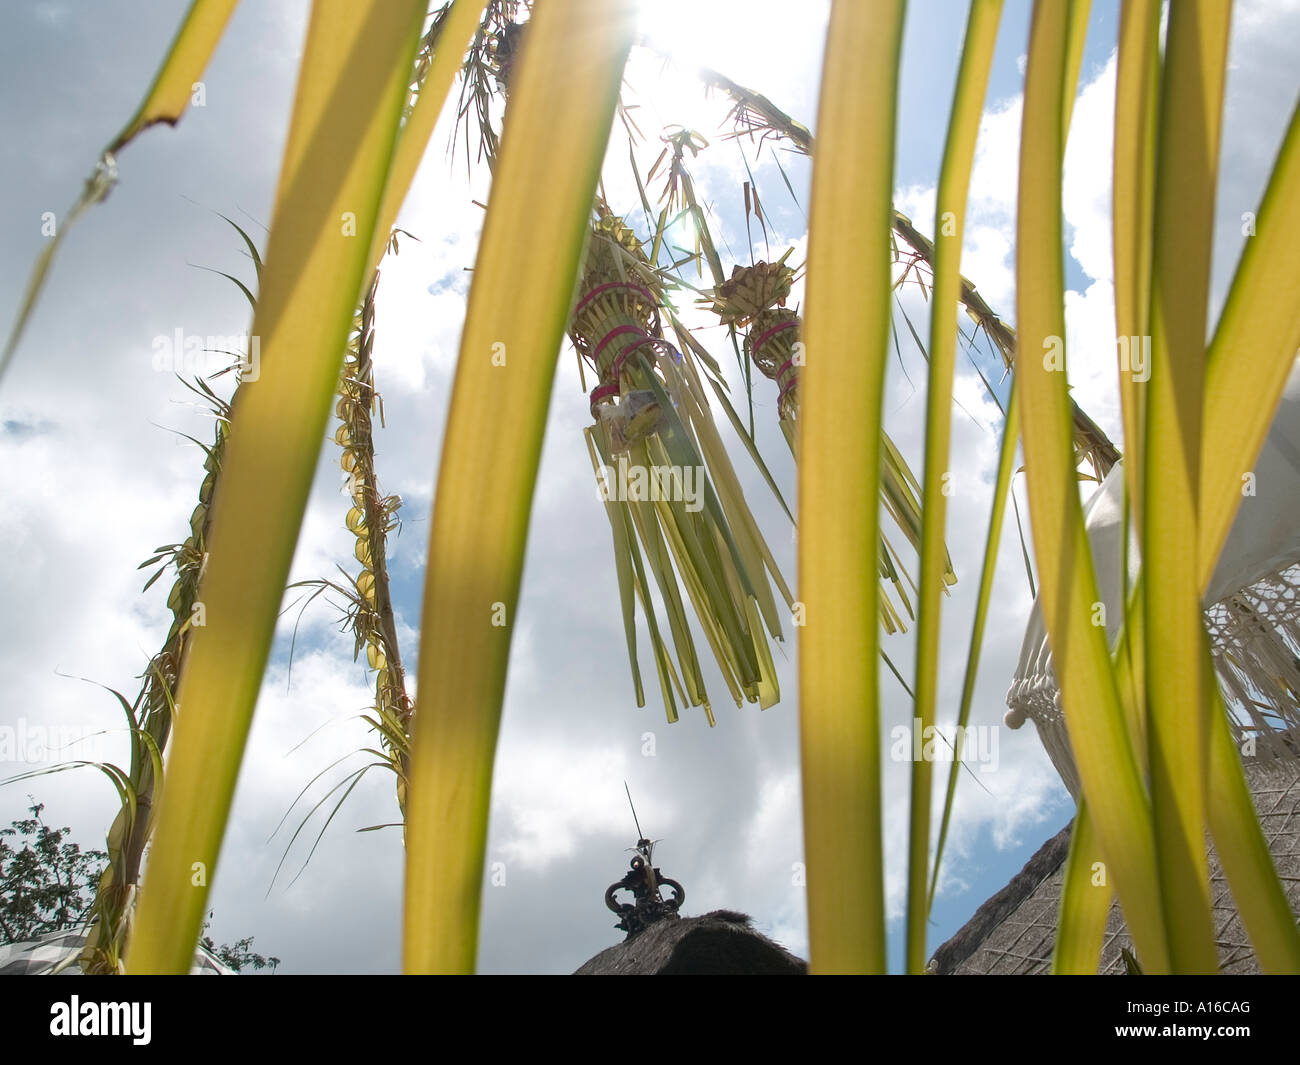 Temple shrine decoration during a feast day showing bamboo poles called penjors in Bali Indonesia Stock Photo